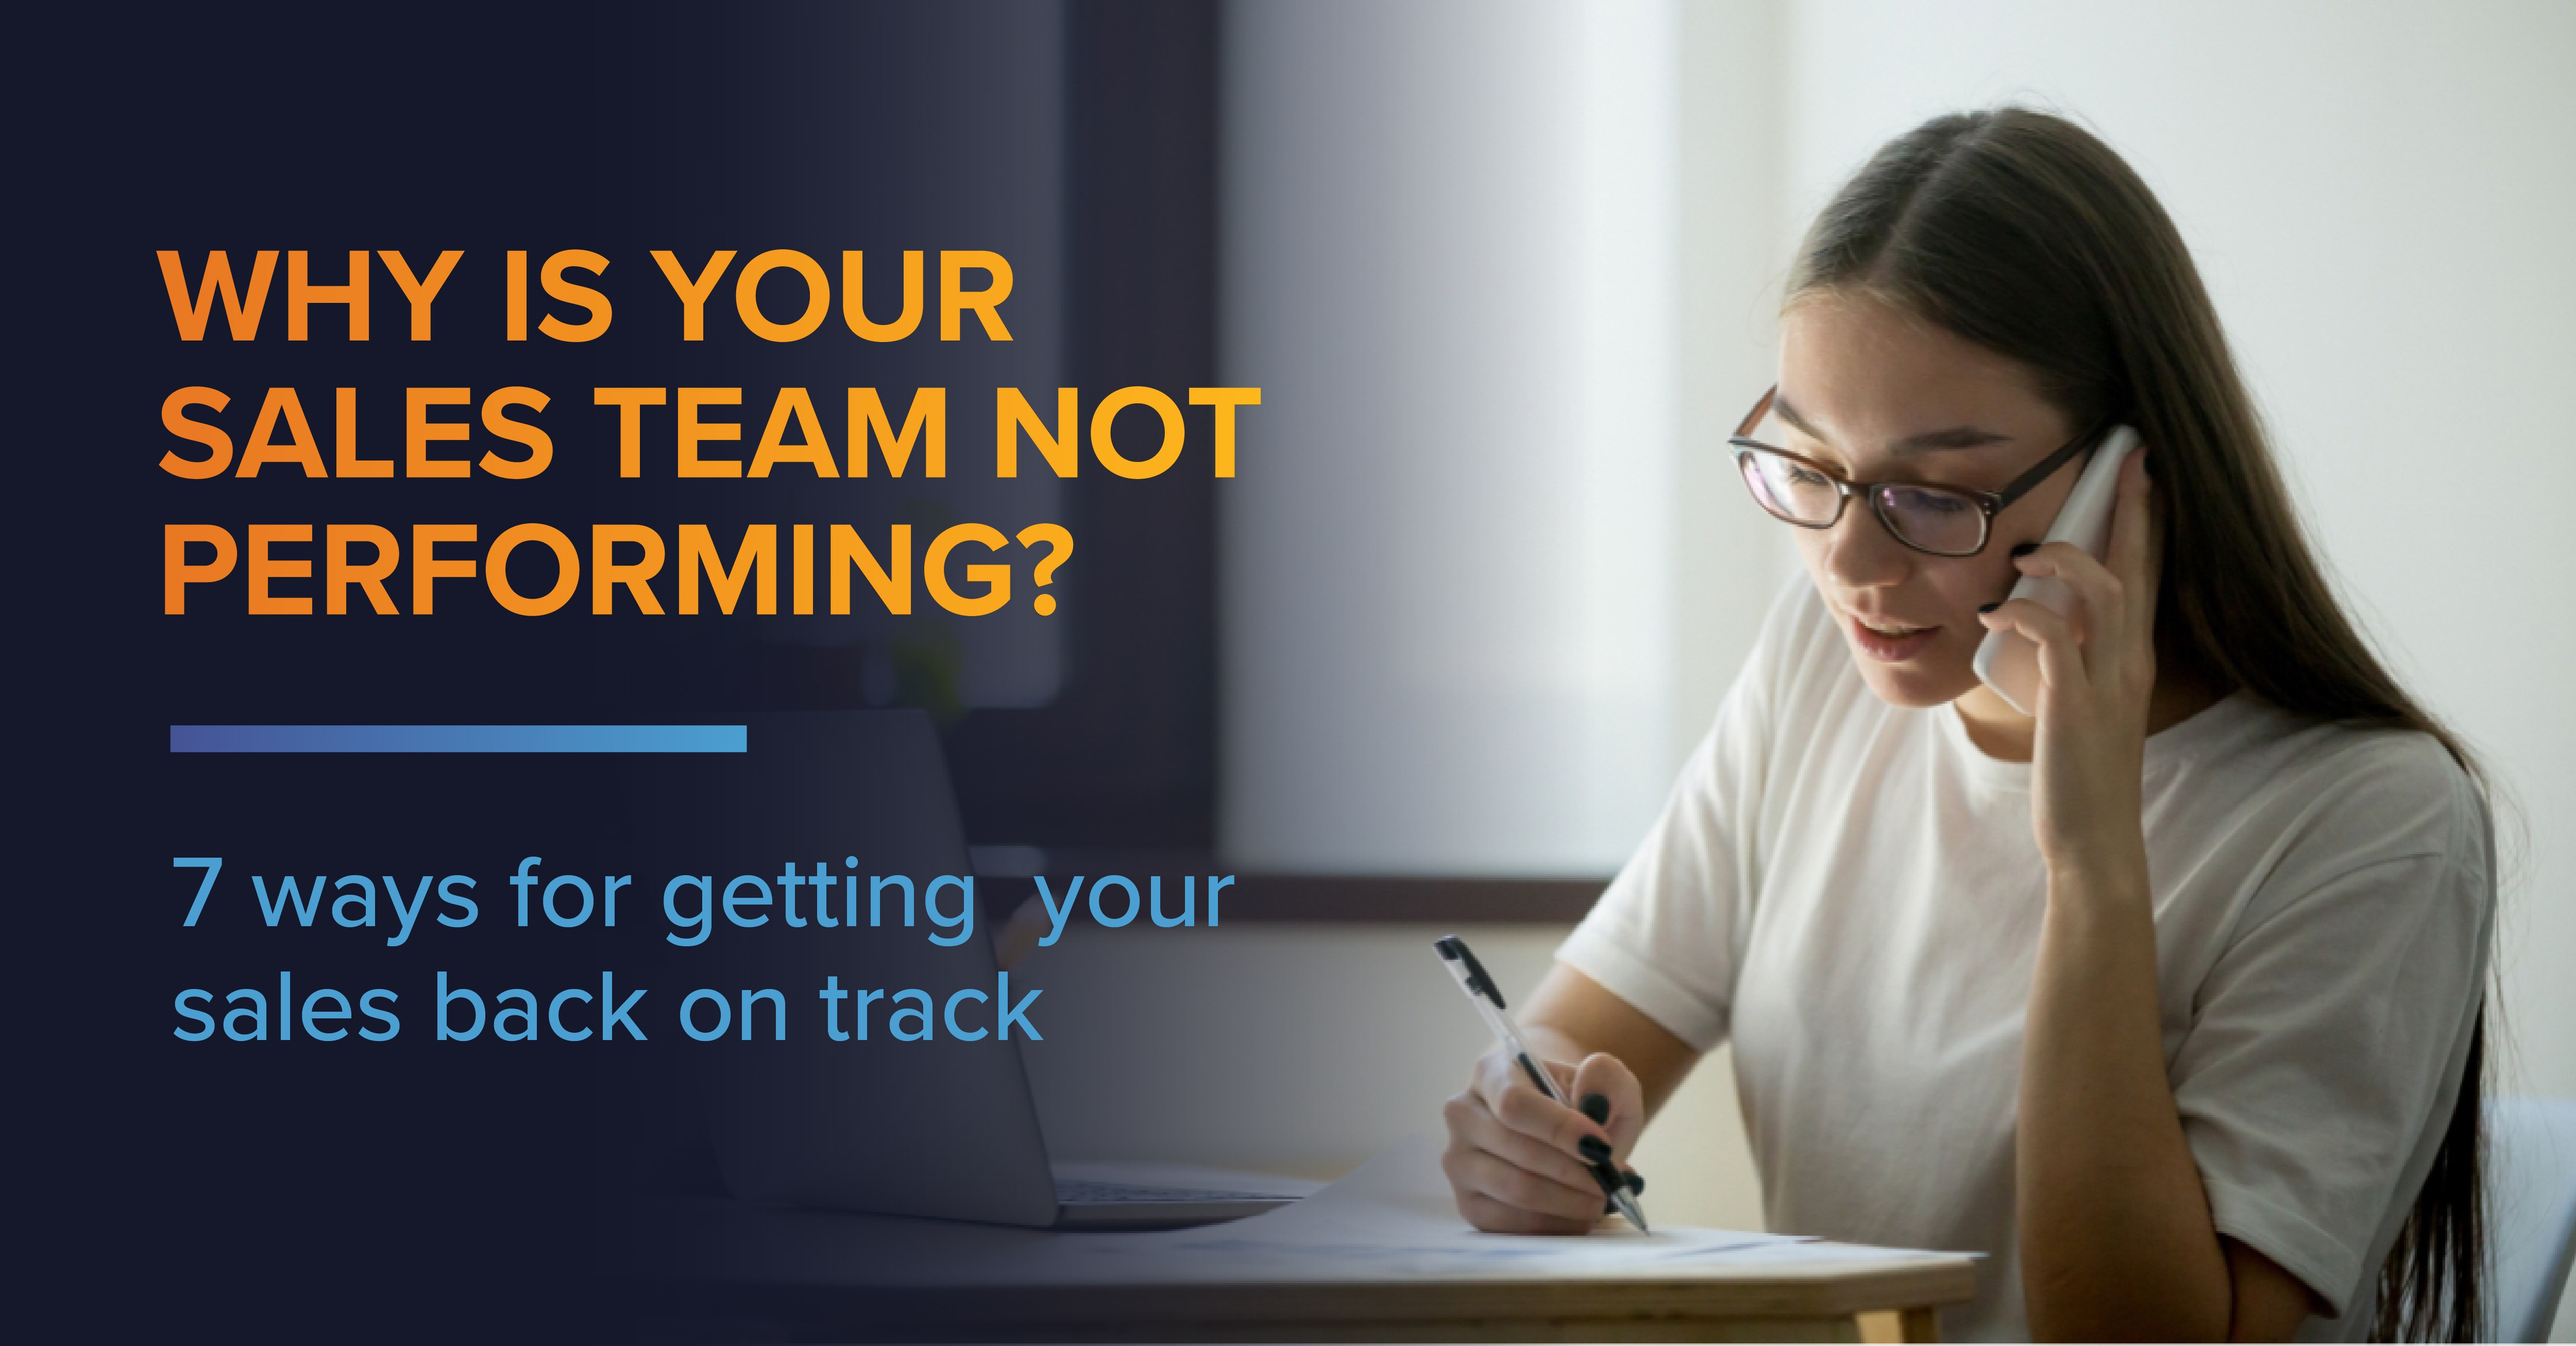 Why is your sales team not performing- 7 ways for getting your team back on track.